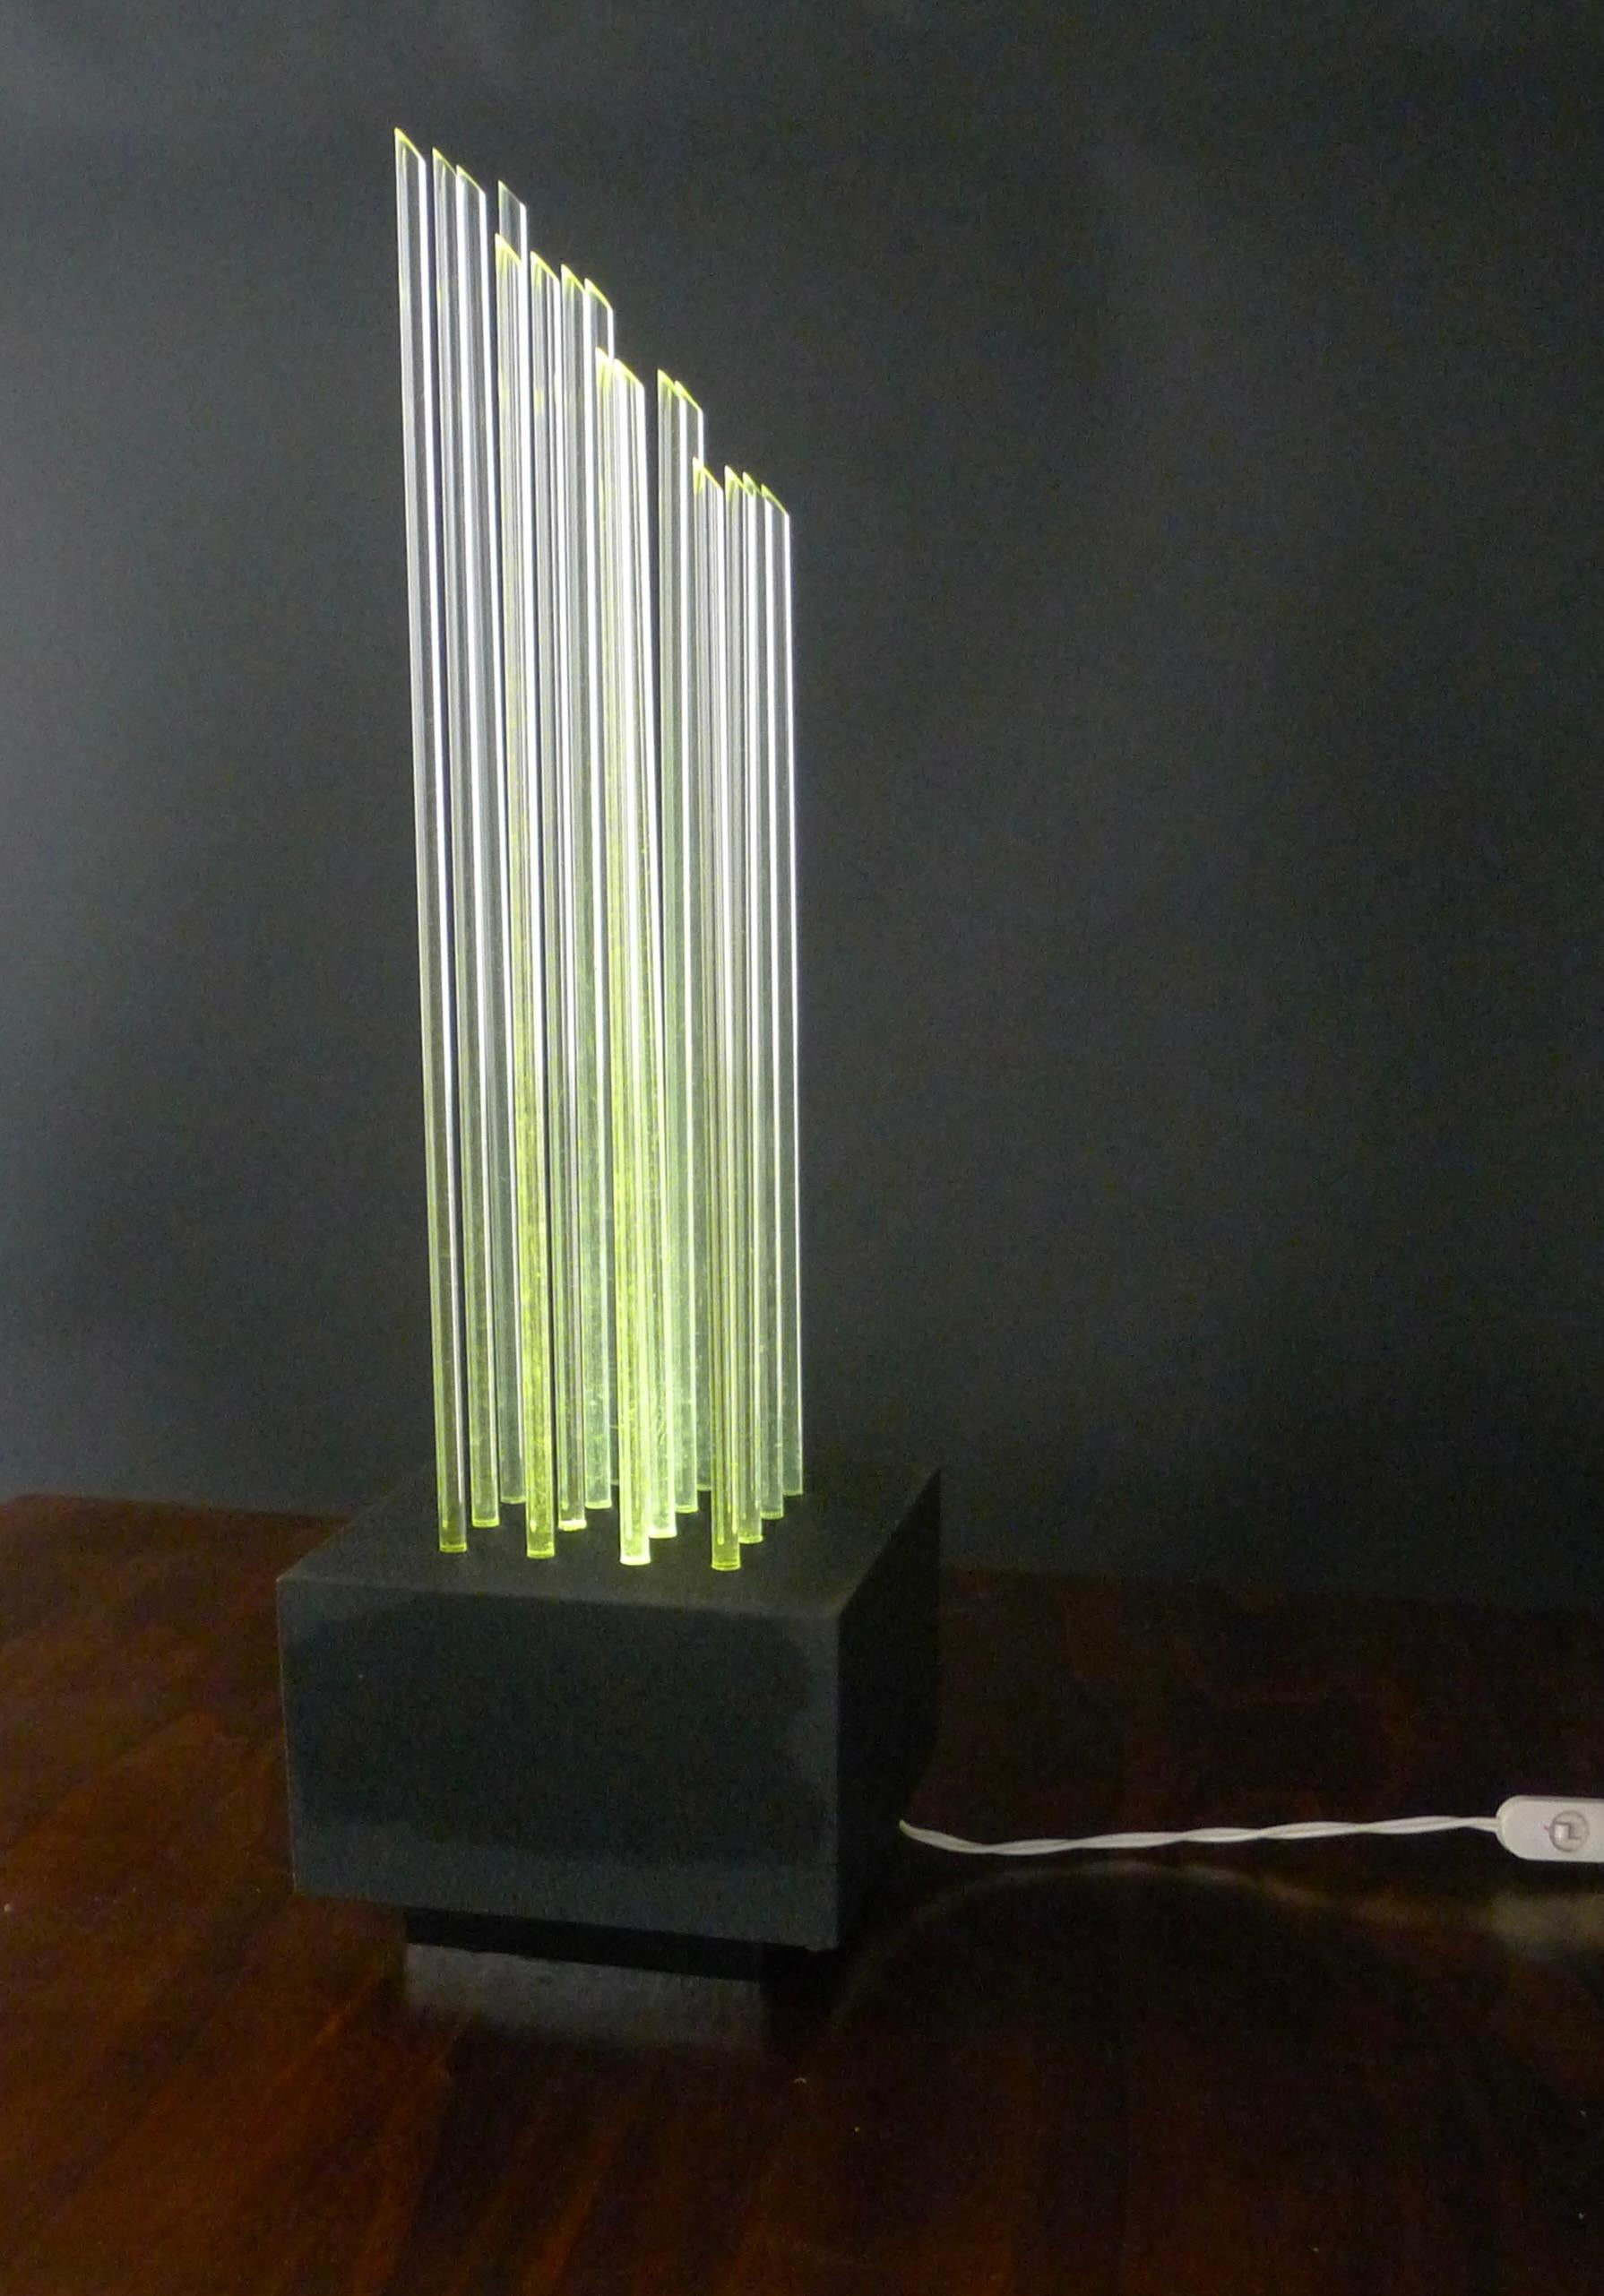 Stunning Pop Art Table Lamp, comprising 16 plexiglass rods illuminated through circular holes in the black aluminium base.

Believed to be a model titled Divieto, attributed to Gianfranco Fini and Fabrizio Cocchia, possibly for New Lamp, though no